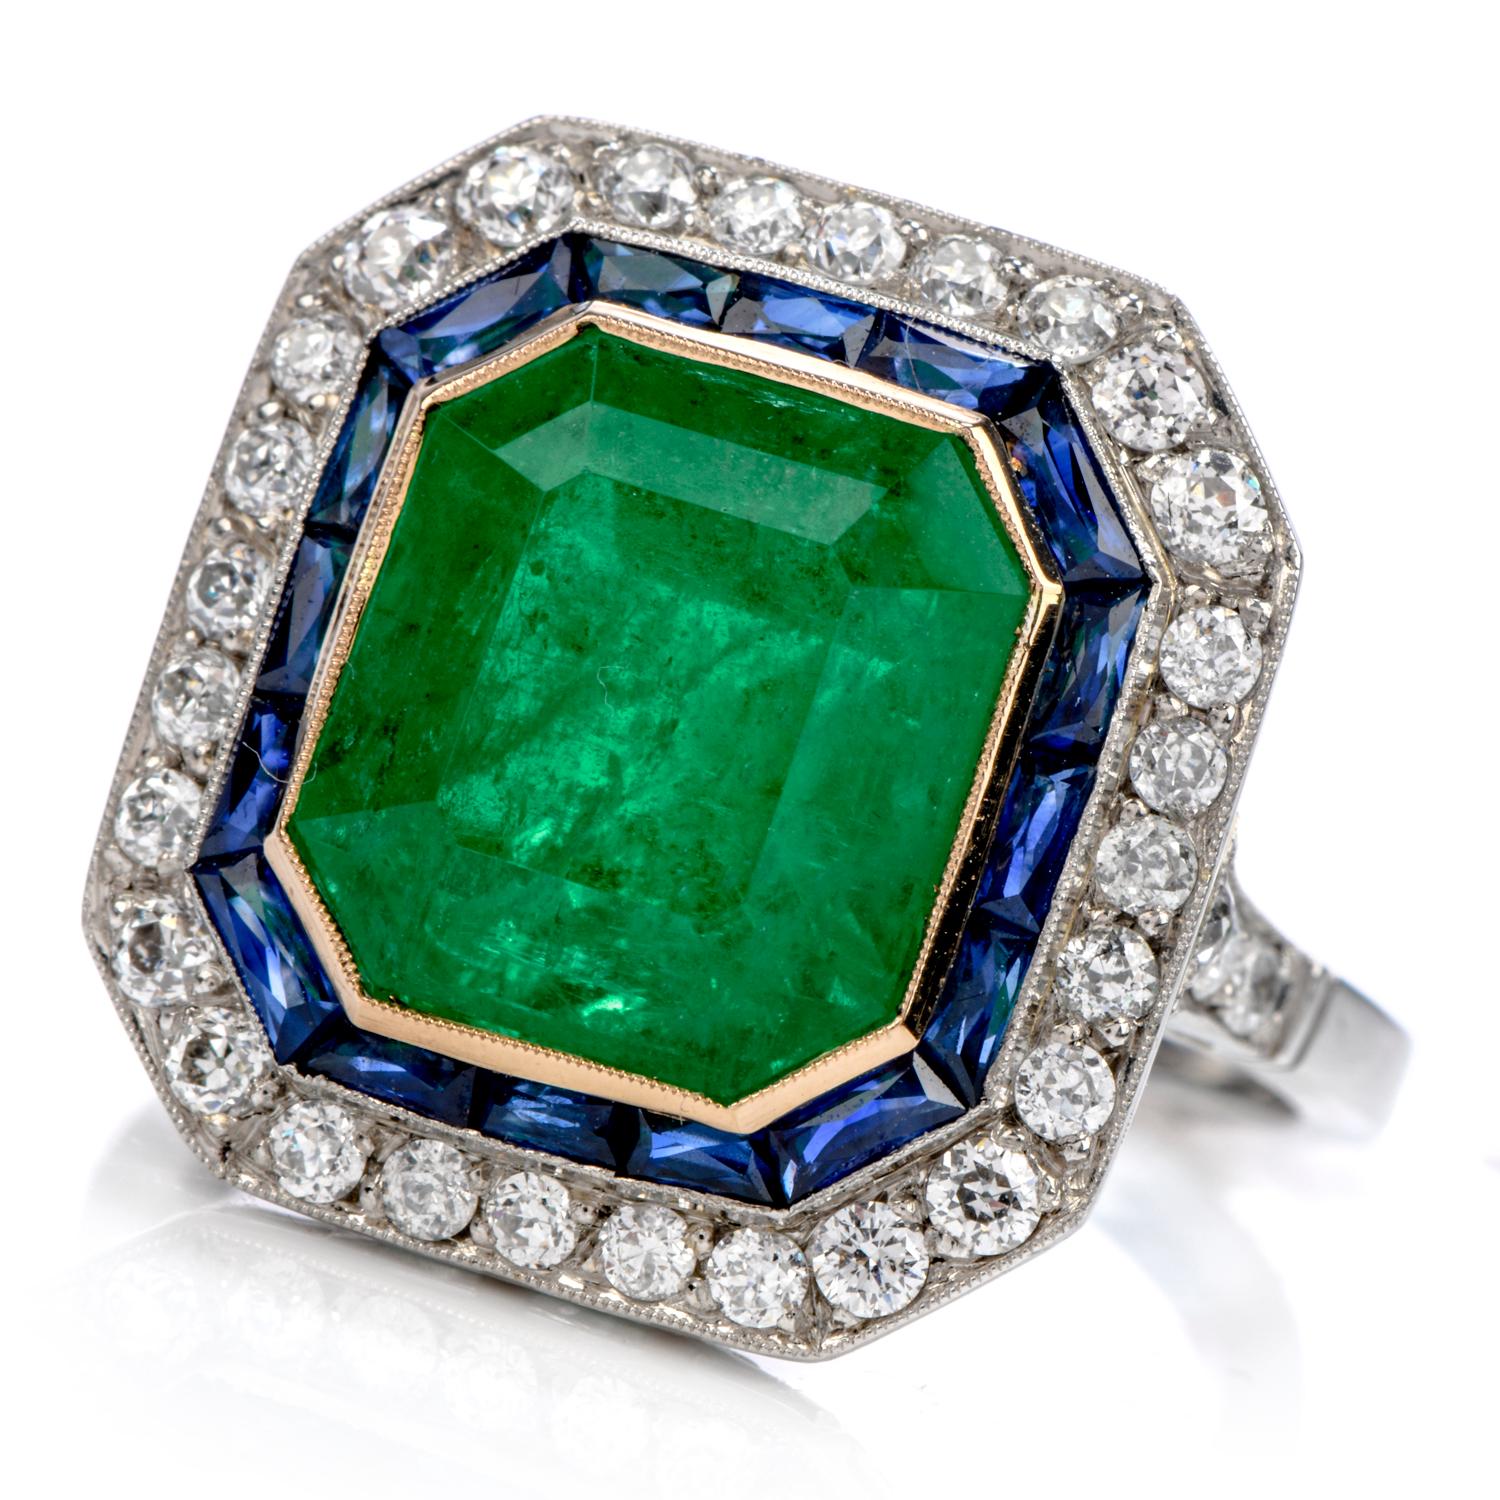 This wellmade Estate Green genuine Emerald Cocktail Ring is inspired in the Art Deco Era,

It is crafted in Solid Platinum

Featured in the center is an approximatetly 7.38 carats Emerald Cut  genuine Emerald, set in 18k yellow gold